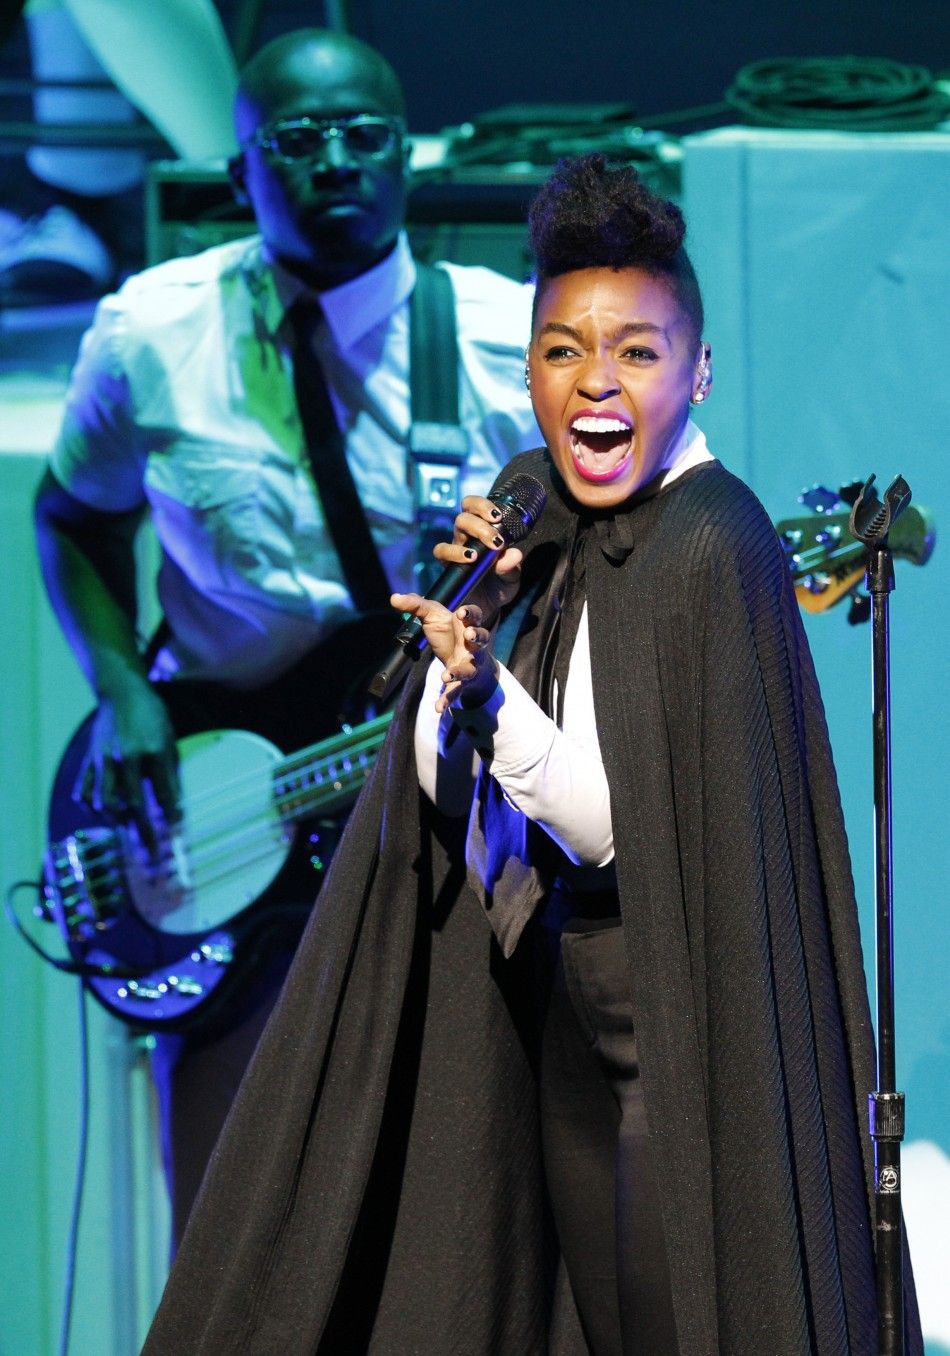 Janelle Monae performs at the Gibson Amphitheatre in Universal City